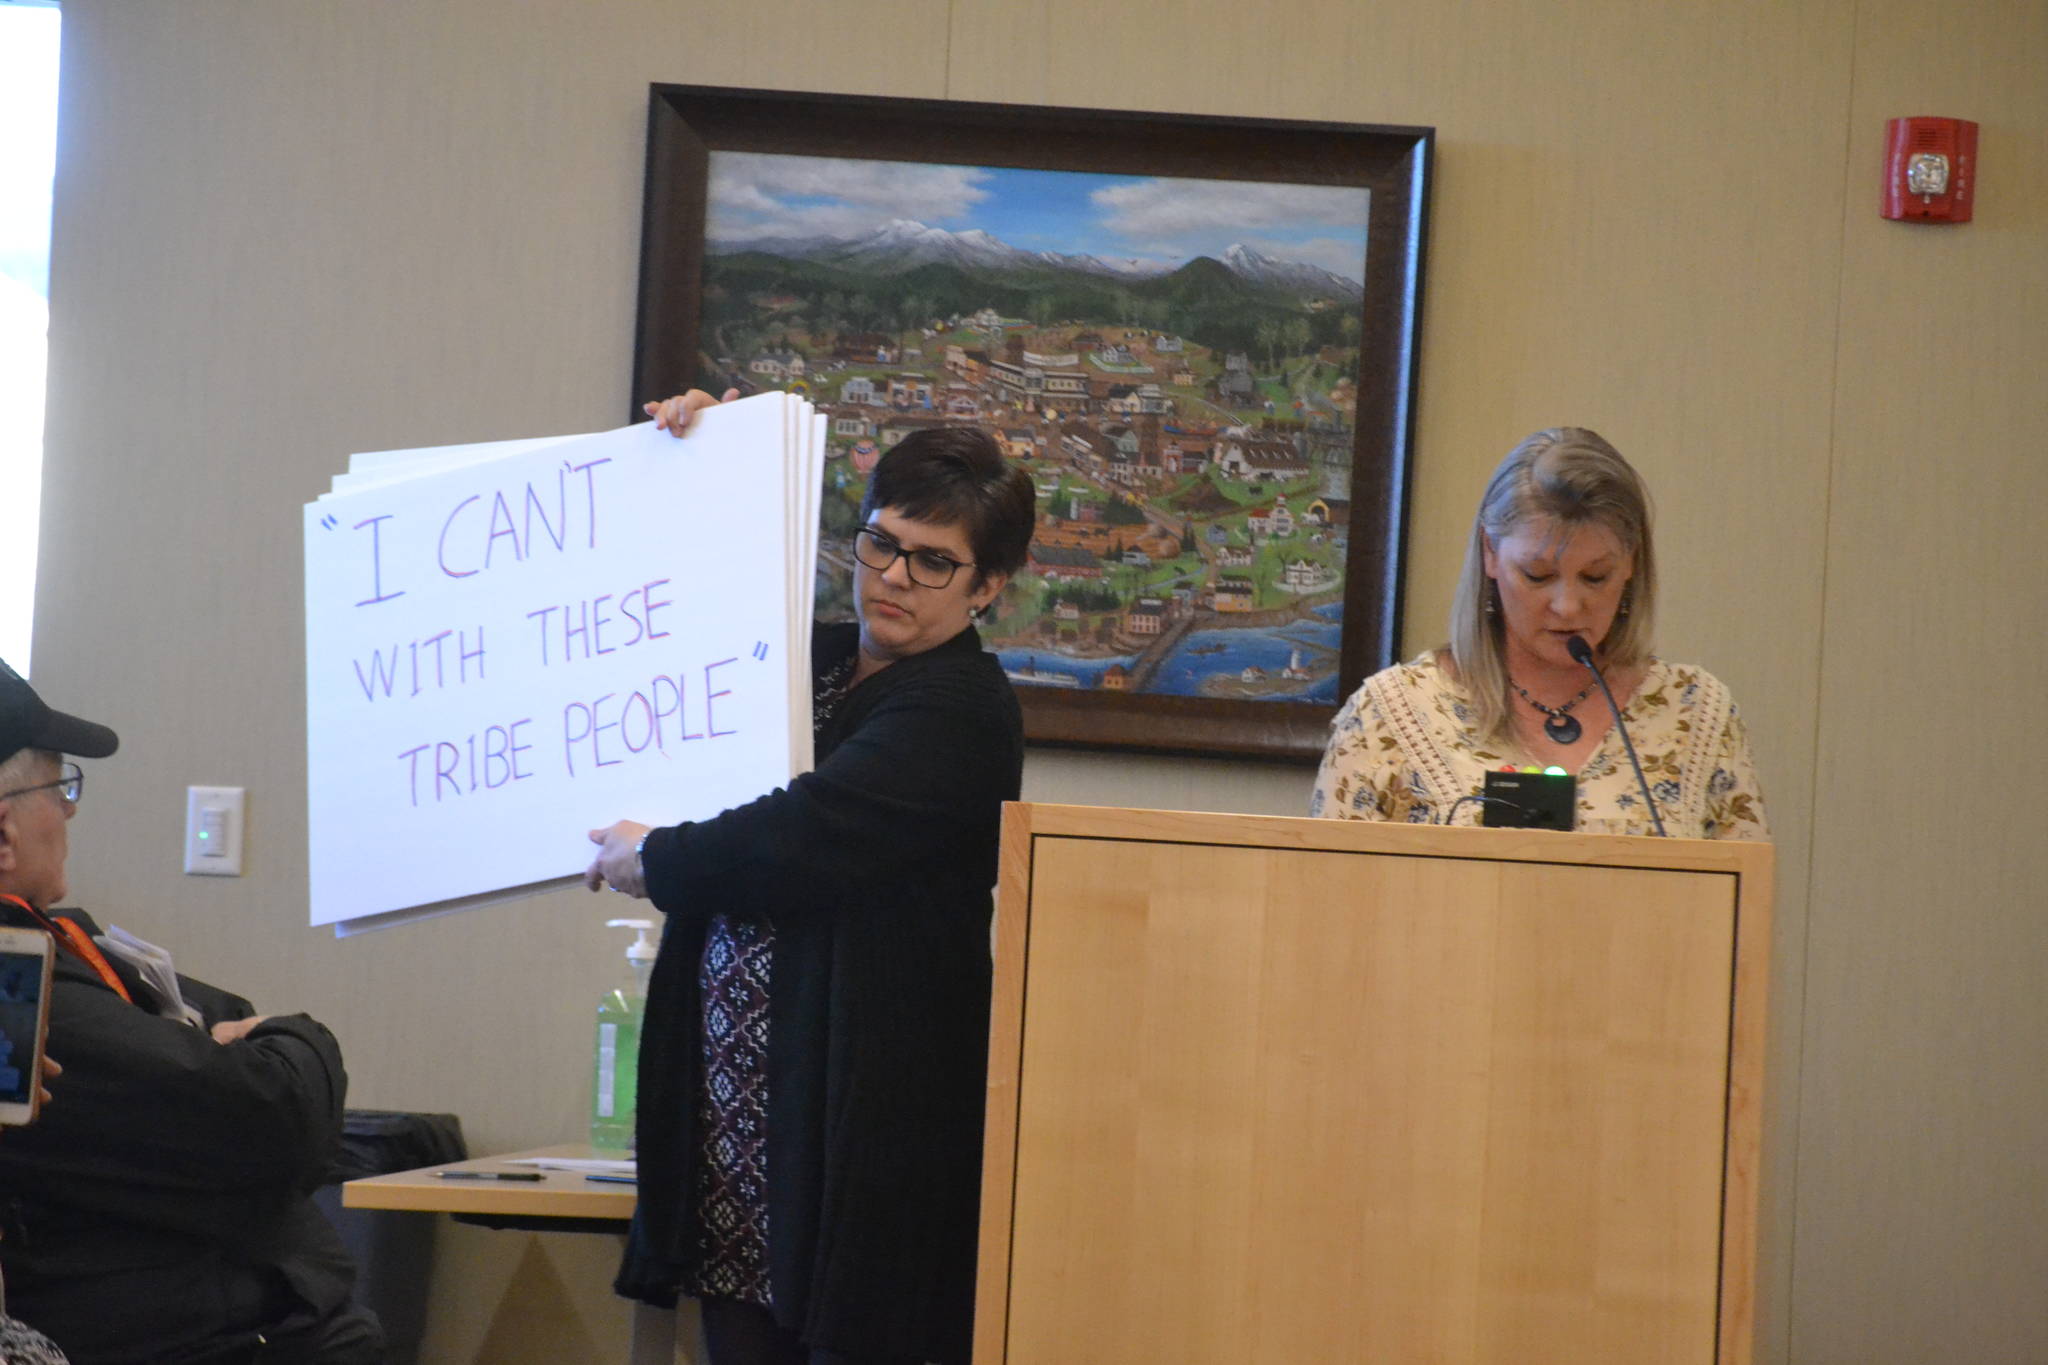 In March, Nicole Clark, left, and Vicki Lowe, right, along with Shenna Younger asked Sequim City Council to draft a resolution against systemic racism after seeing Facebook posts on the Save Our Sequim Facebook page. Page organizers deleted and denounced the comments, they said. Now Younger seeks a resolution from the city council to denounce racism, discrimination and hate speech. Sequim Gazette photo by Matthew Nash